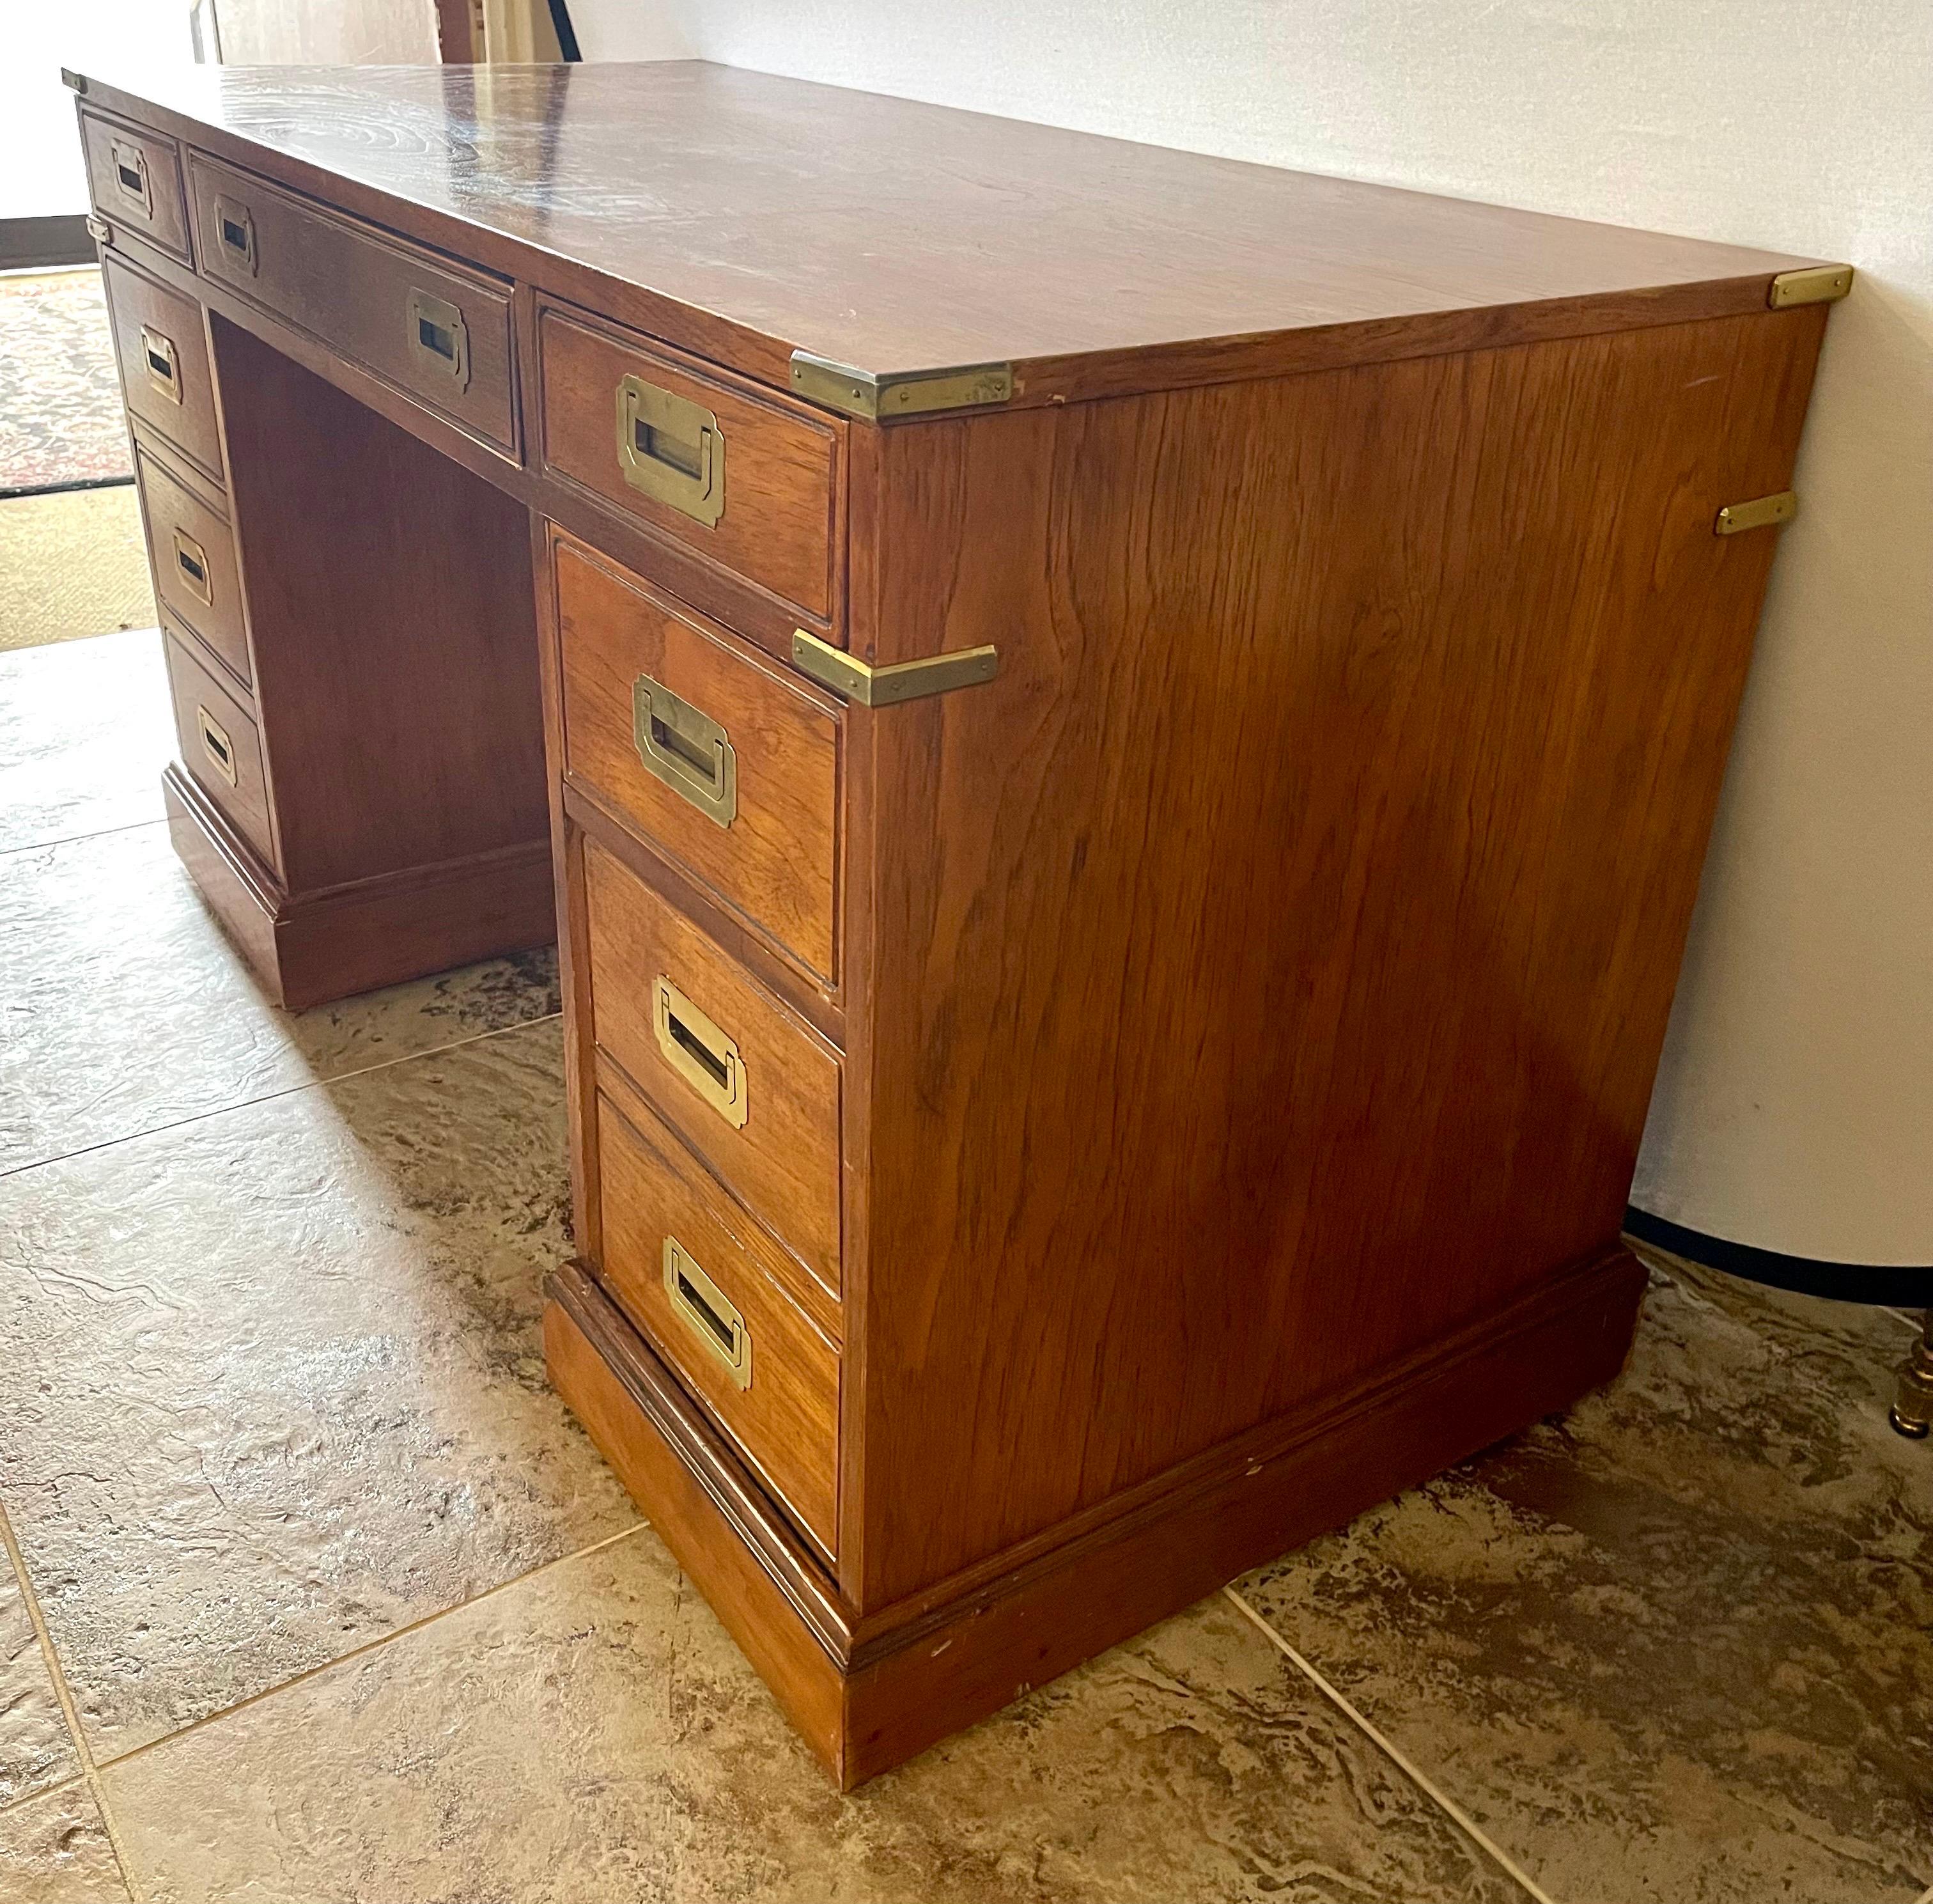 Brass Mahogany Iconic Campaign Style Kneehole Partners Desk